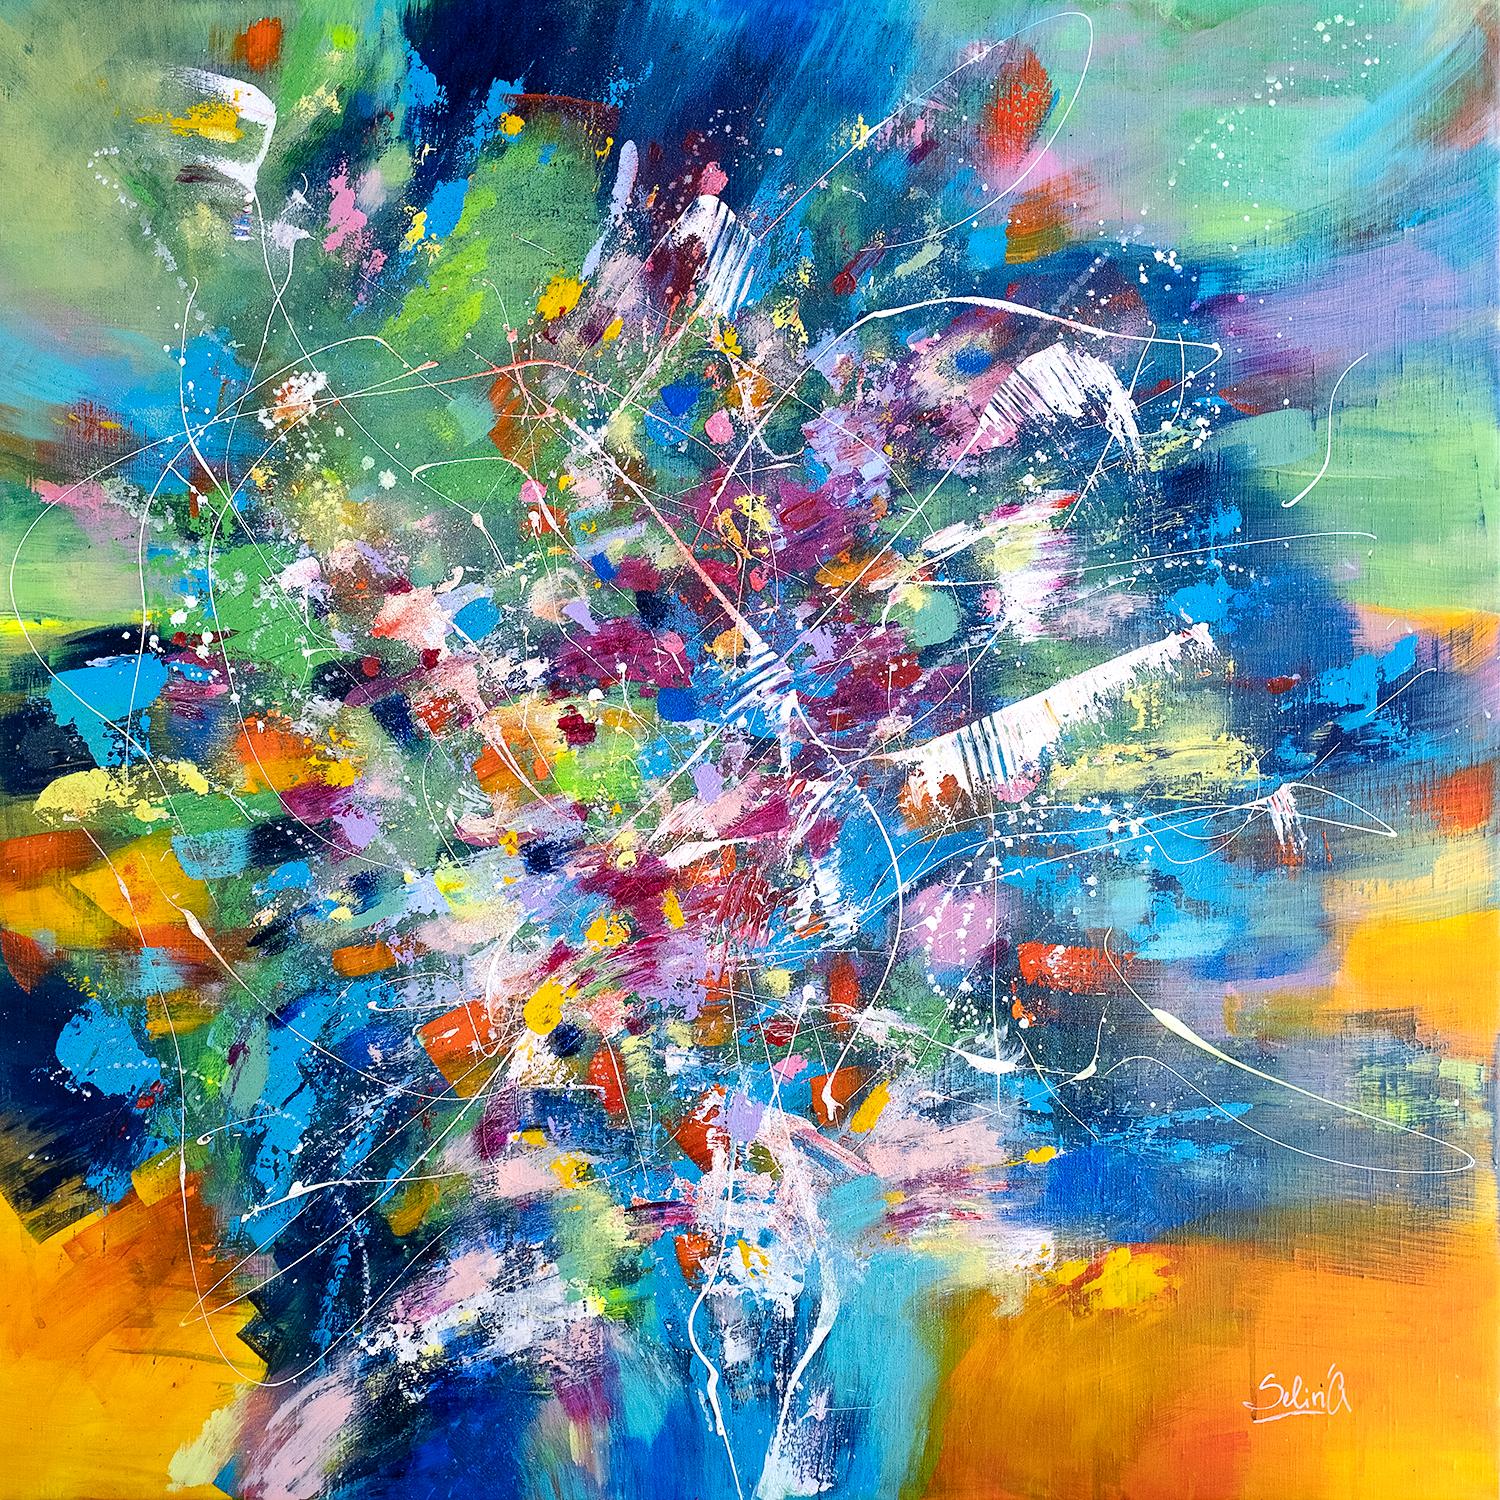 Butterfly effect is about easiness, bright taste of life full of color, energy and positive vibes. Dynamic composition and harmony of colors, textures and tones make this painting very relaxing but still energizing you.                              